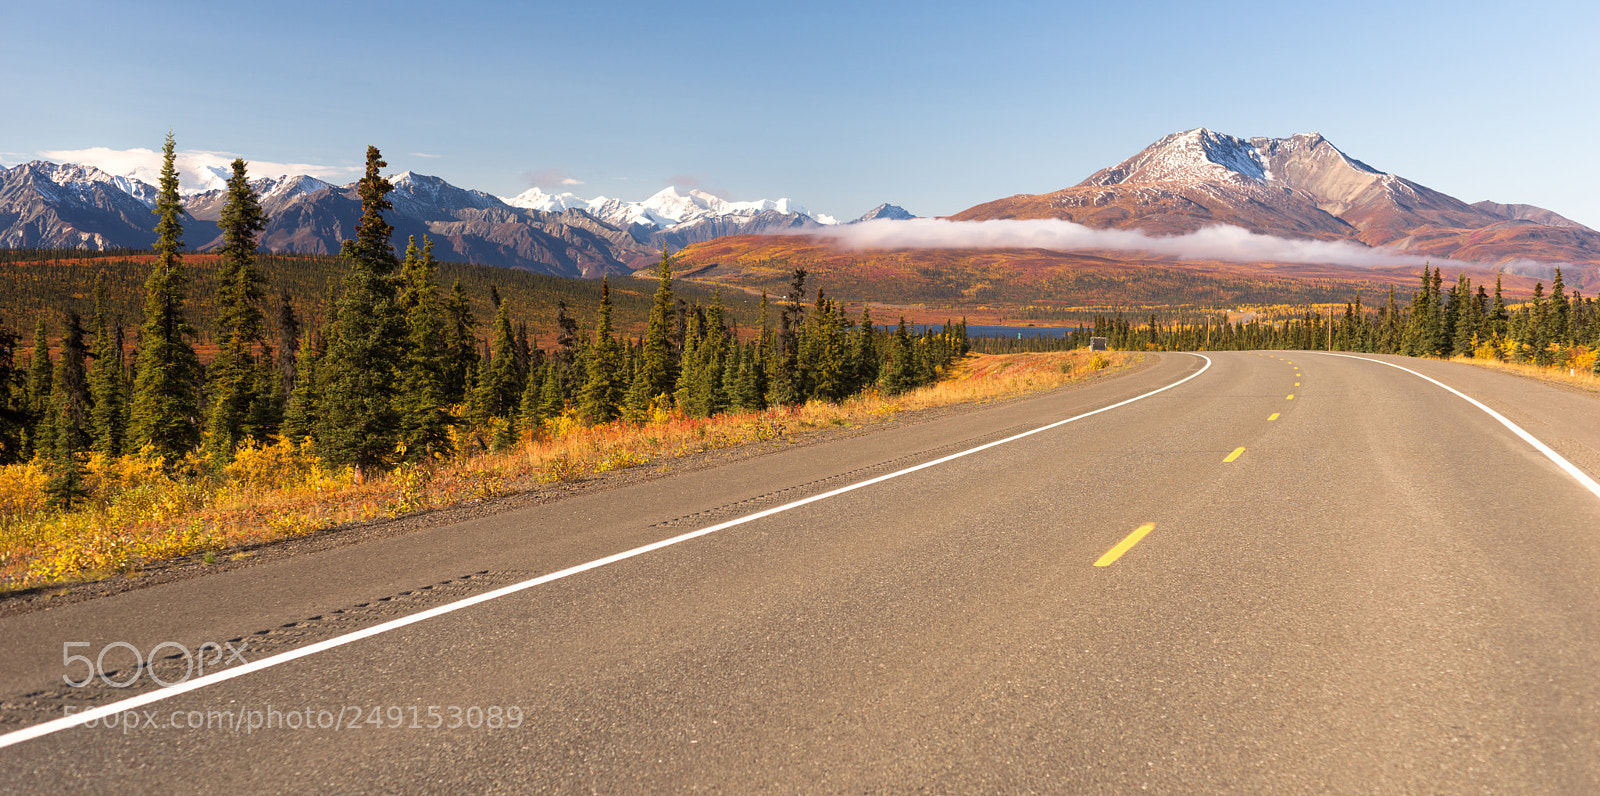 Sony a99 II sample photo. Highway curve wilderness road photography